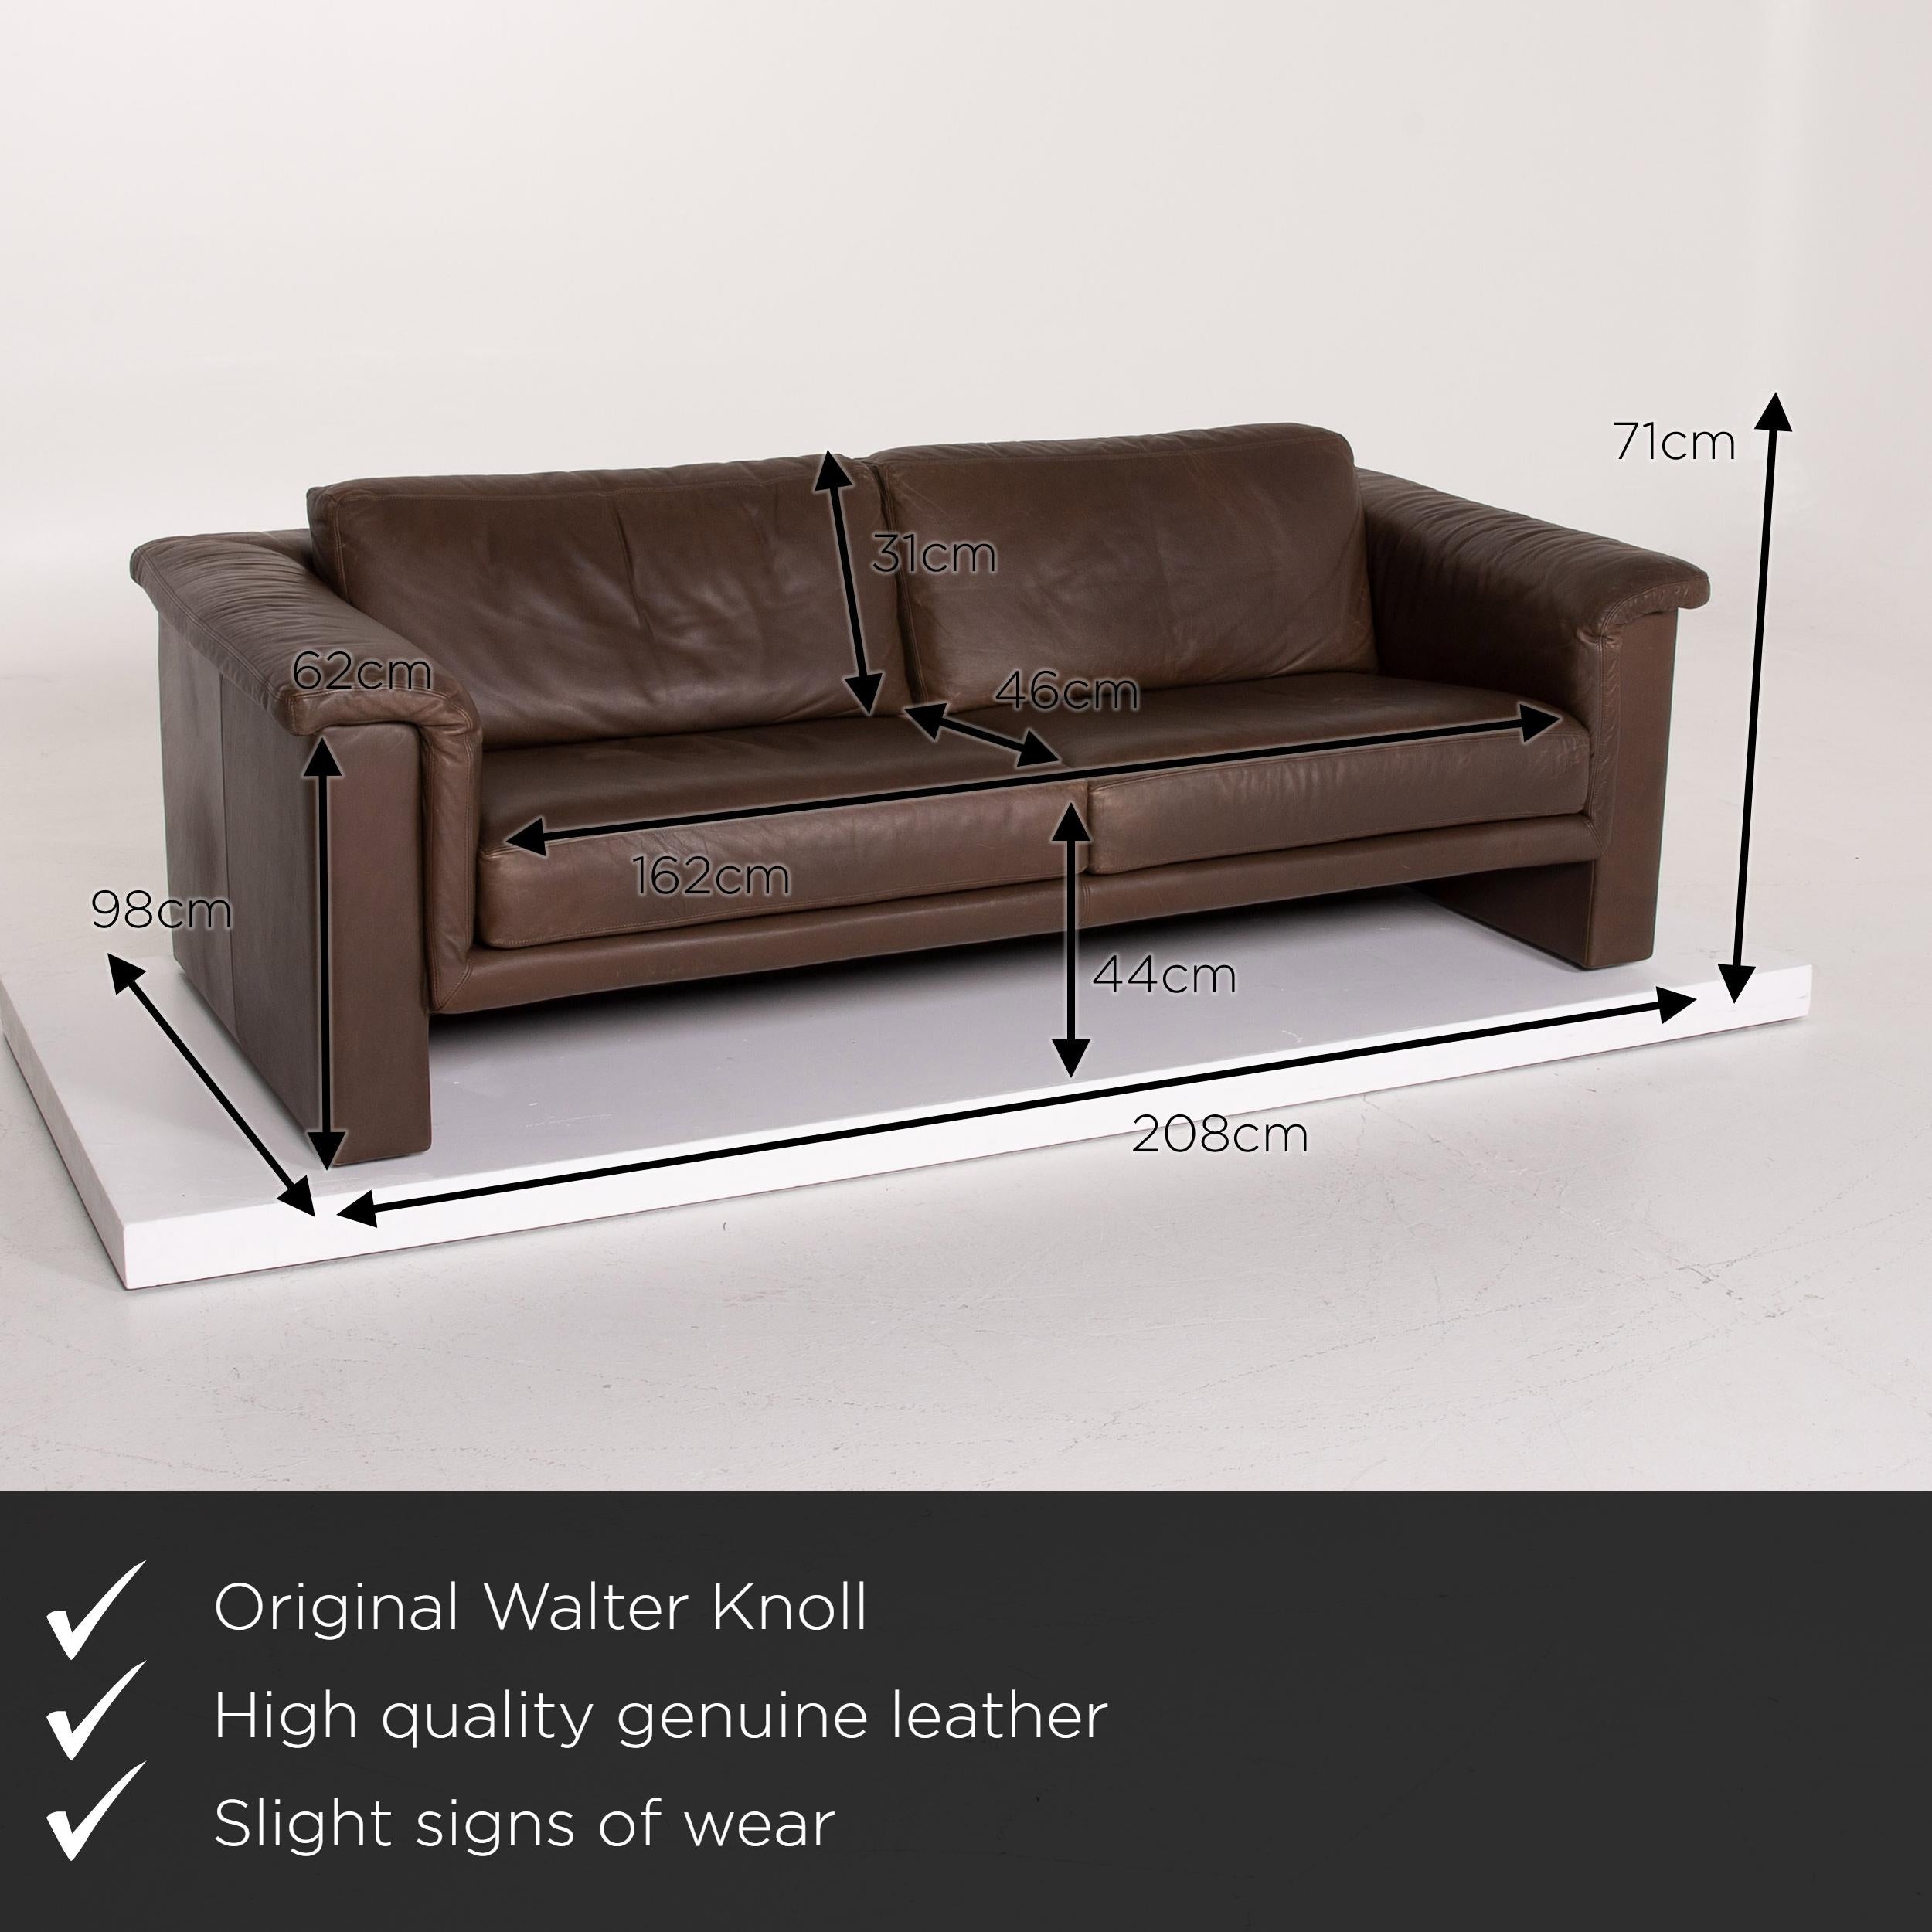 We present to you a Walter Knoll leather sofa brown two-seat.
 
 

 Product measurements in centimeters:
 

Depth 98
Width 208
Height 71
Seat height 44
Rest height 62
Seat depth 46
Seat width 162
Back height 31.
 